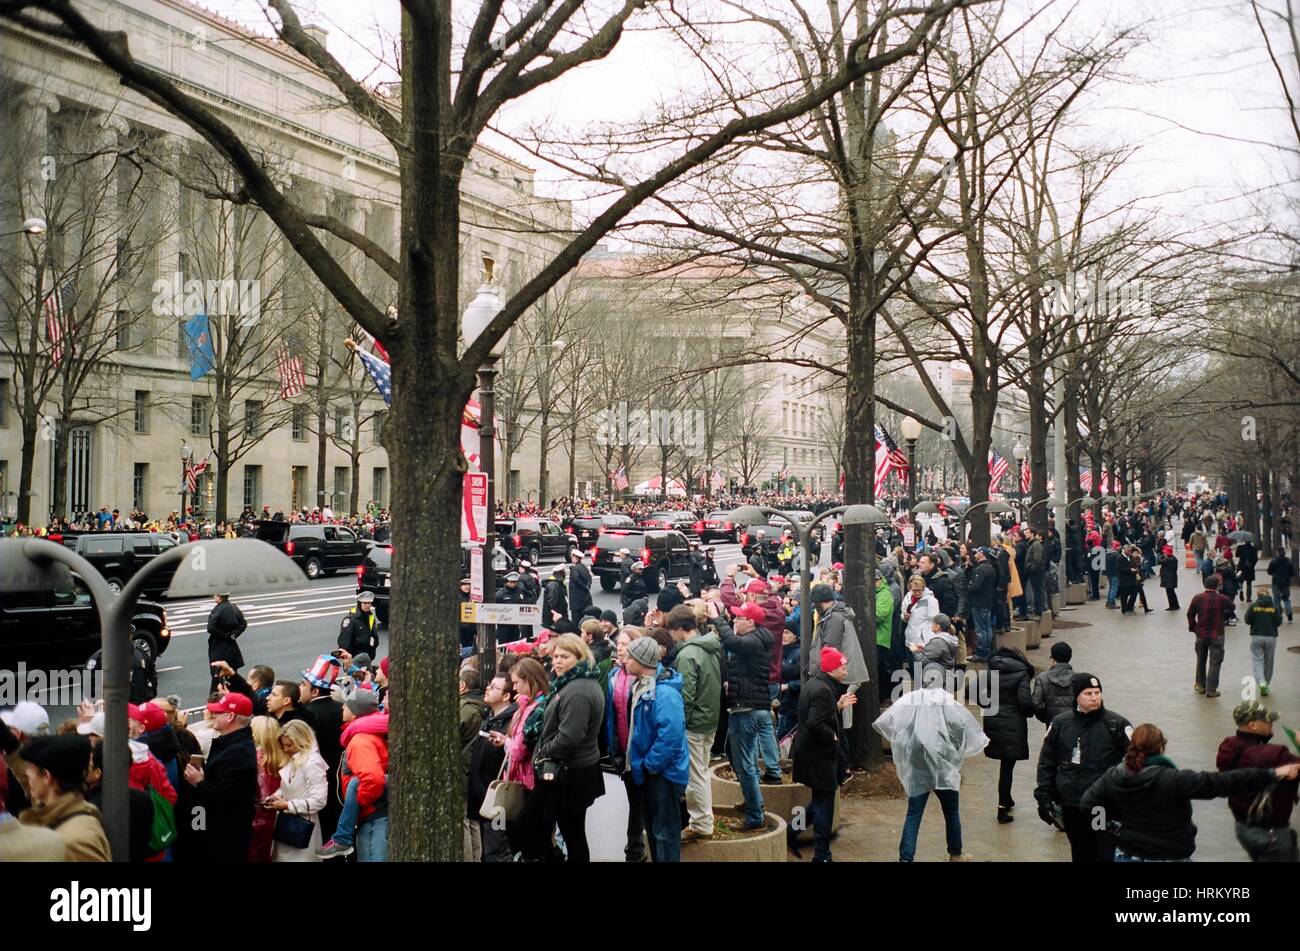 Trump supporters wait on Pennsylvania Avenue for Trump's motorcade to pass  Scenes from Washington D.C. along Pennsylvania Avenue after Donald J. Trump's inauguration as the 45th President of the United States of America. Stock Photo